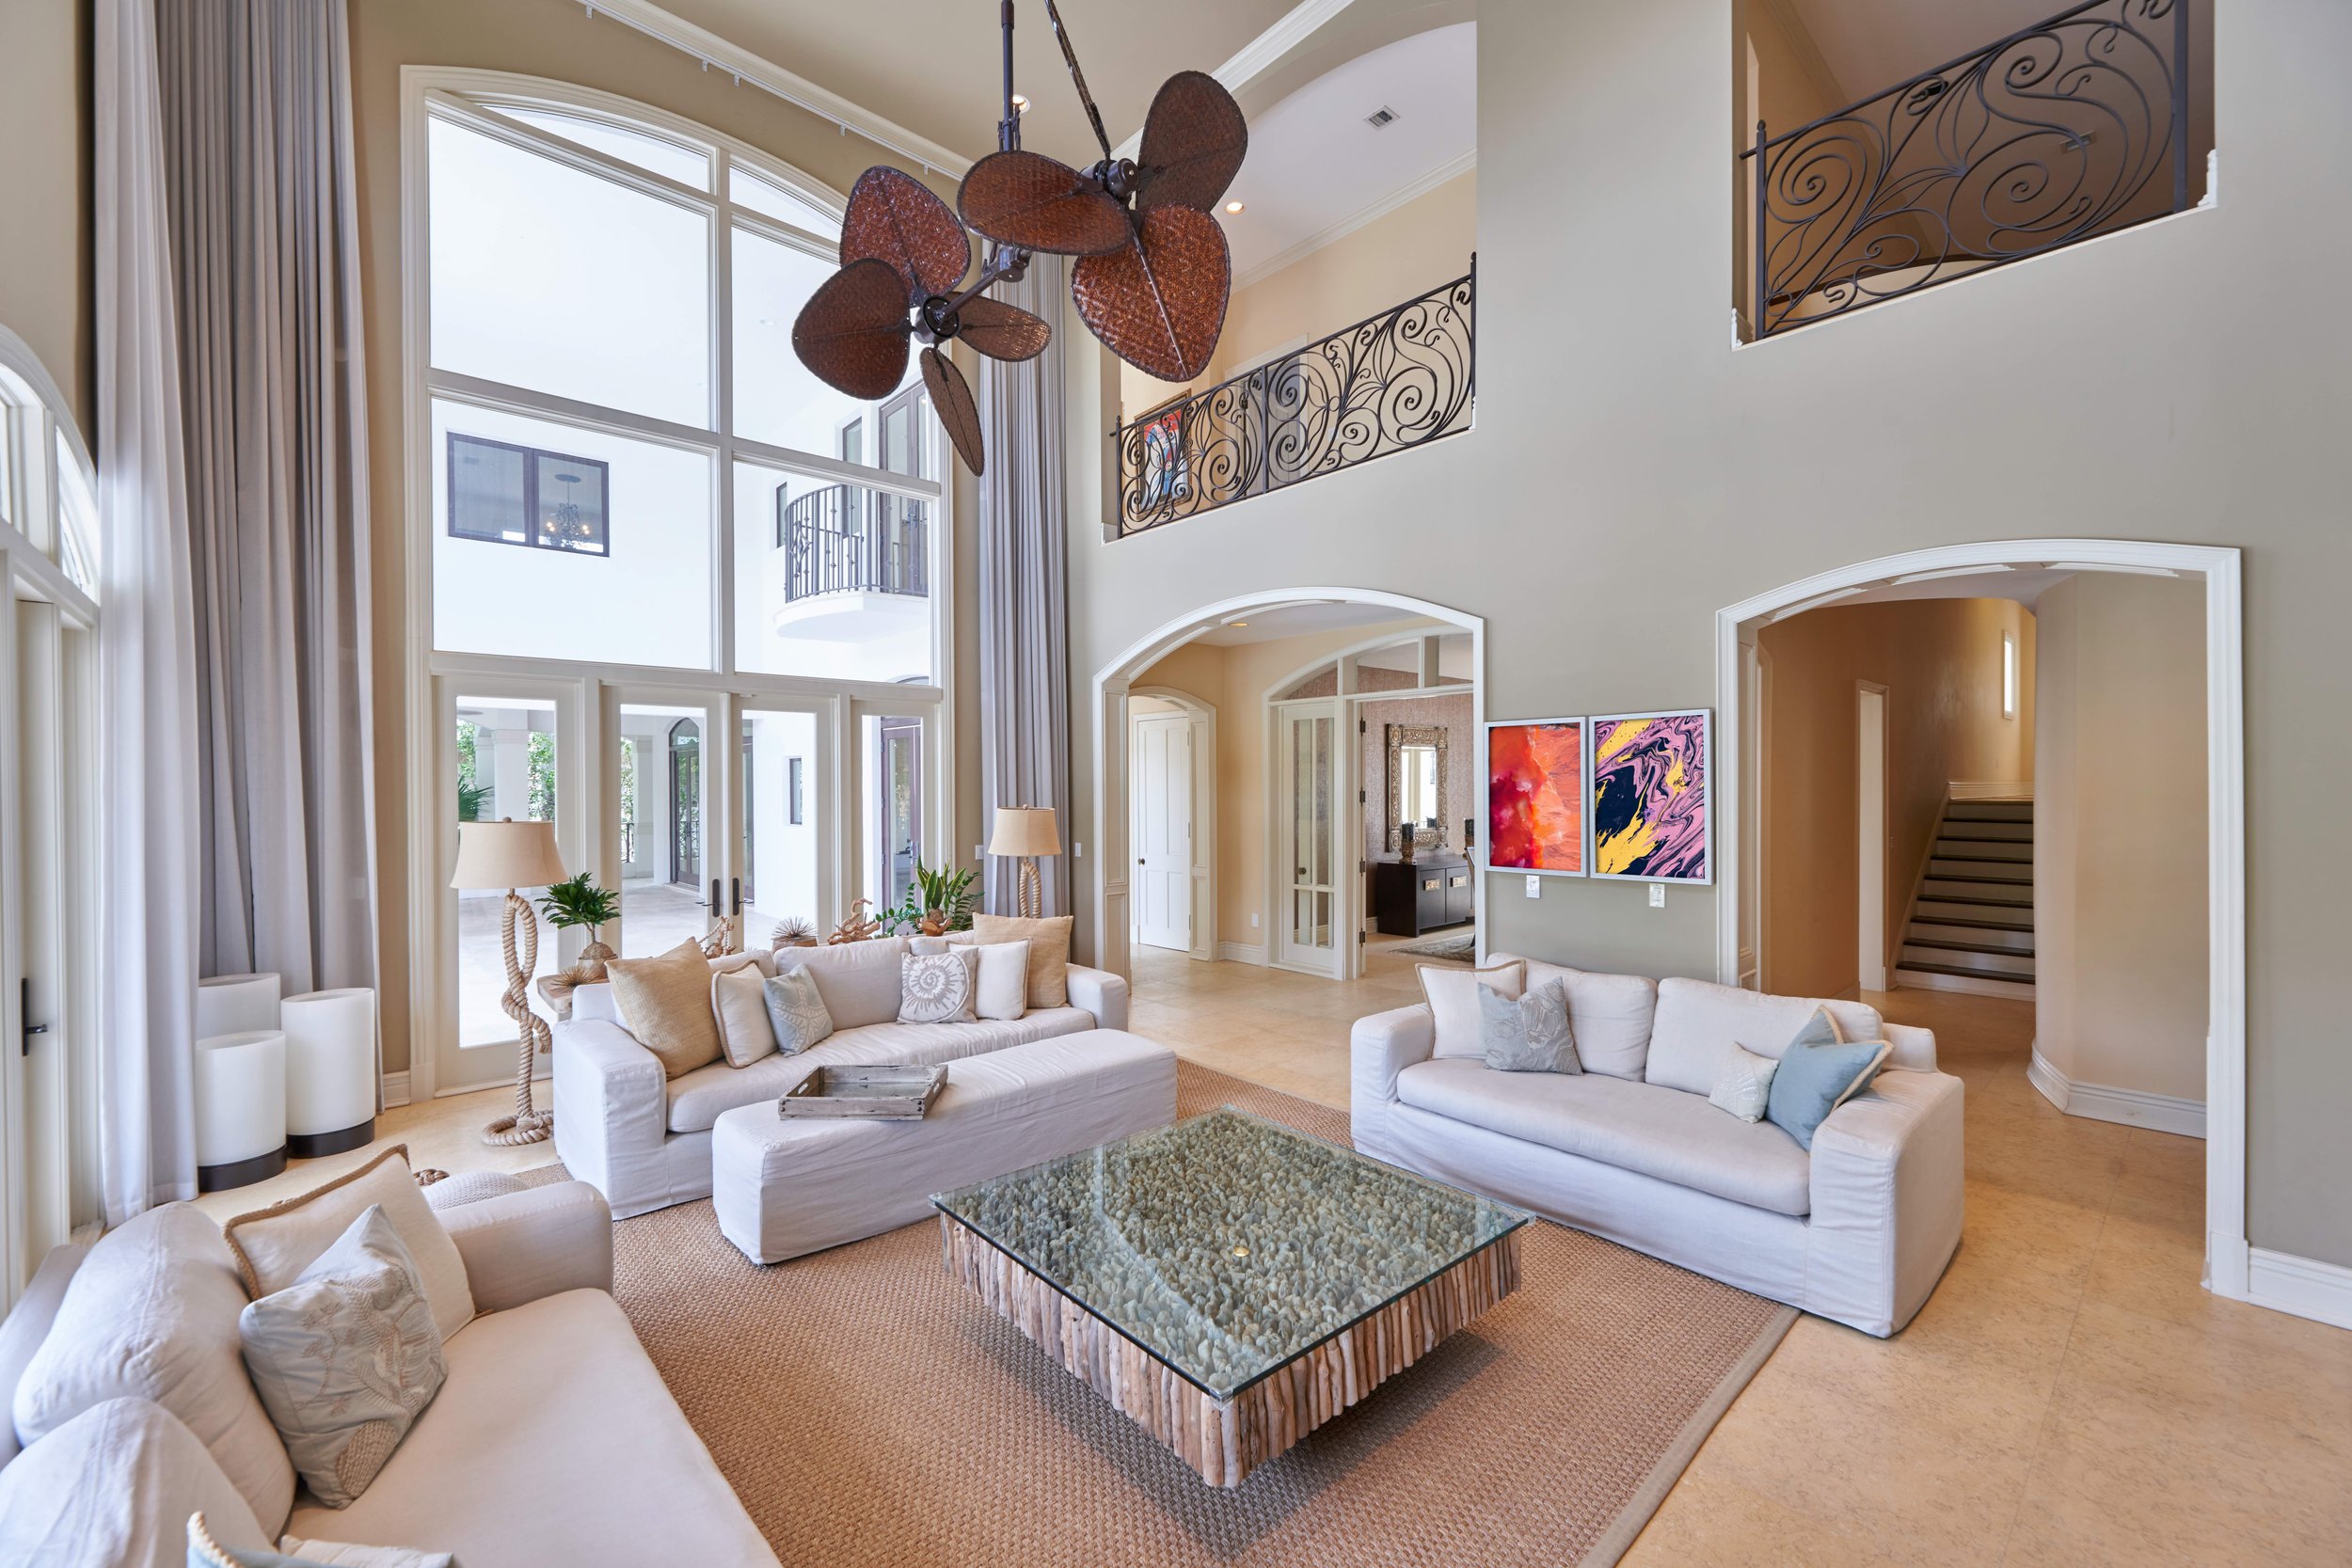 Step Inside This Coral Gables Mansion In The Exclusive Tahiti Beach Asking $12.9 Million 12.jpg